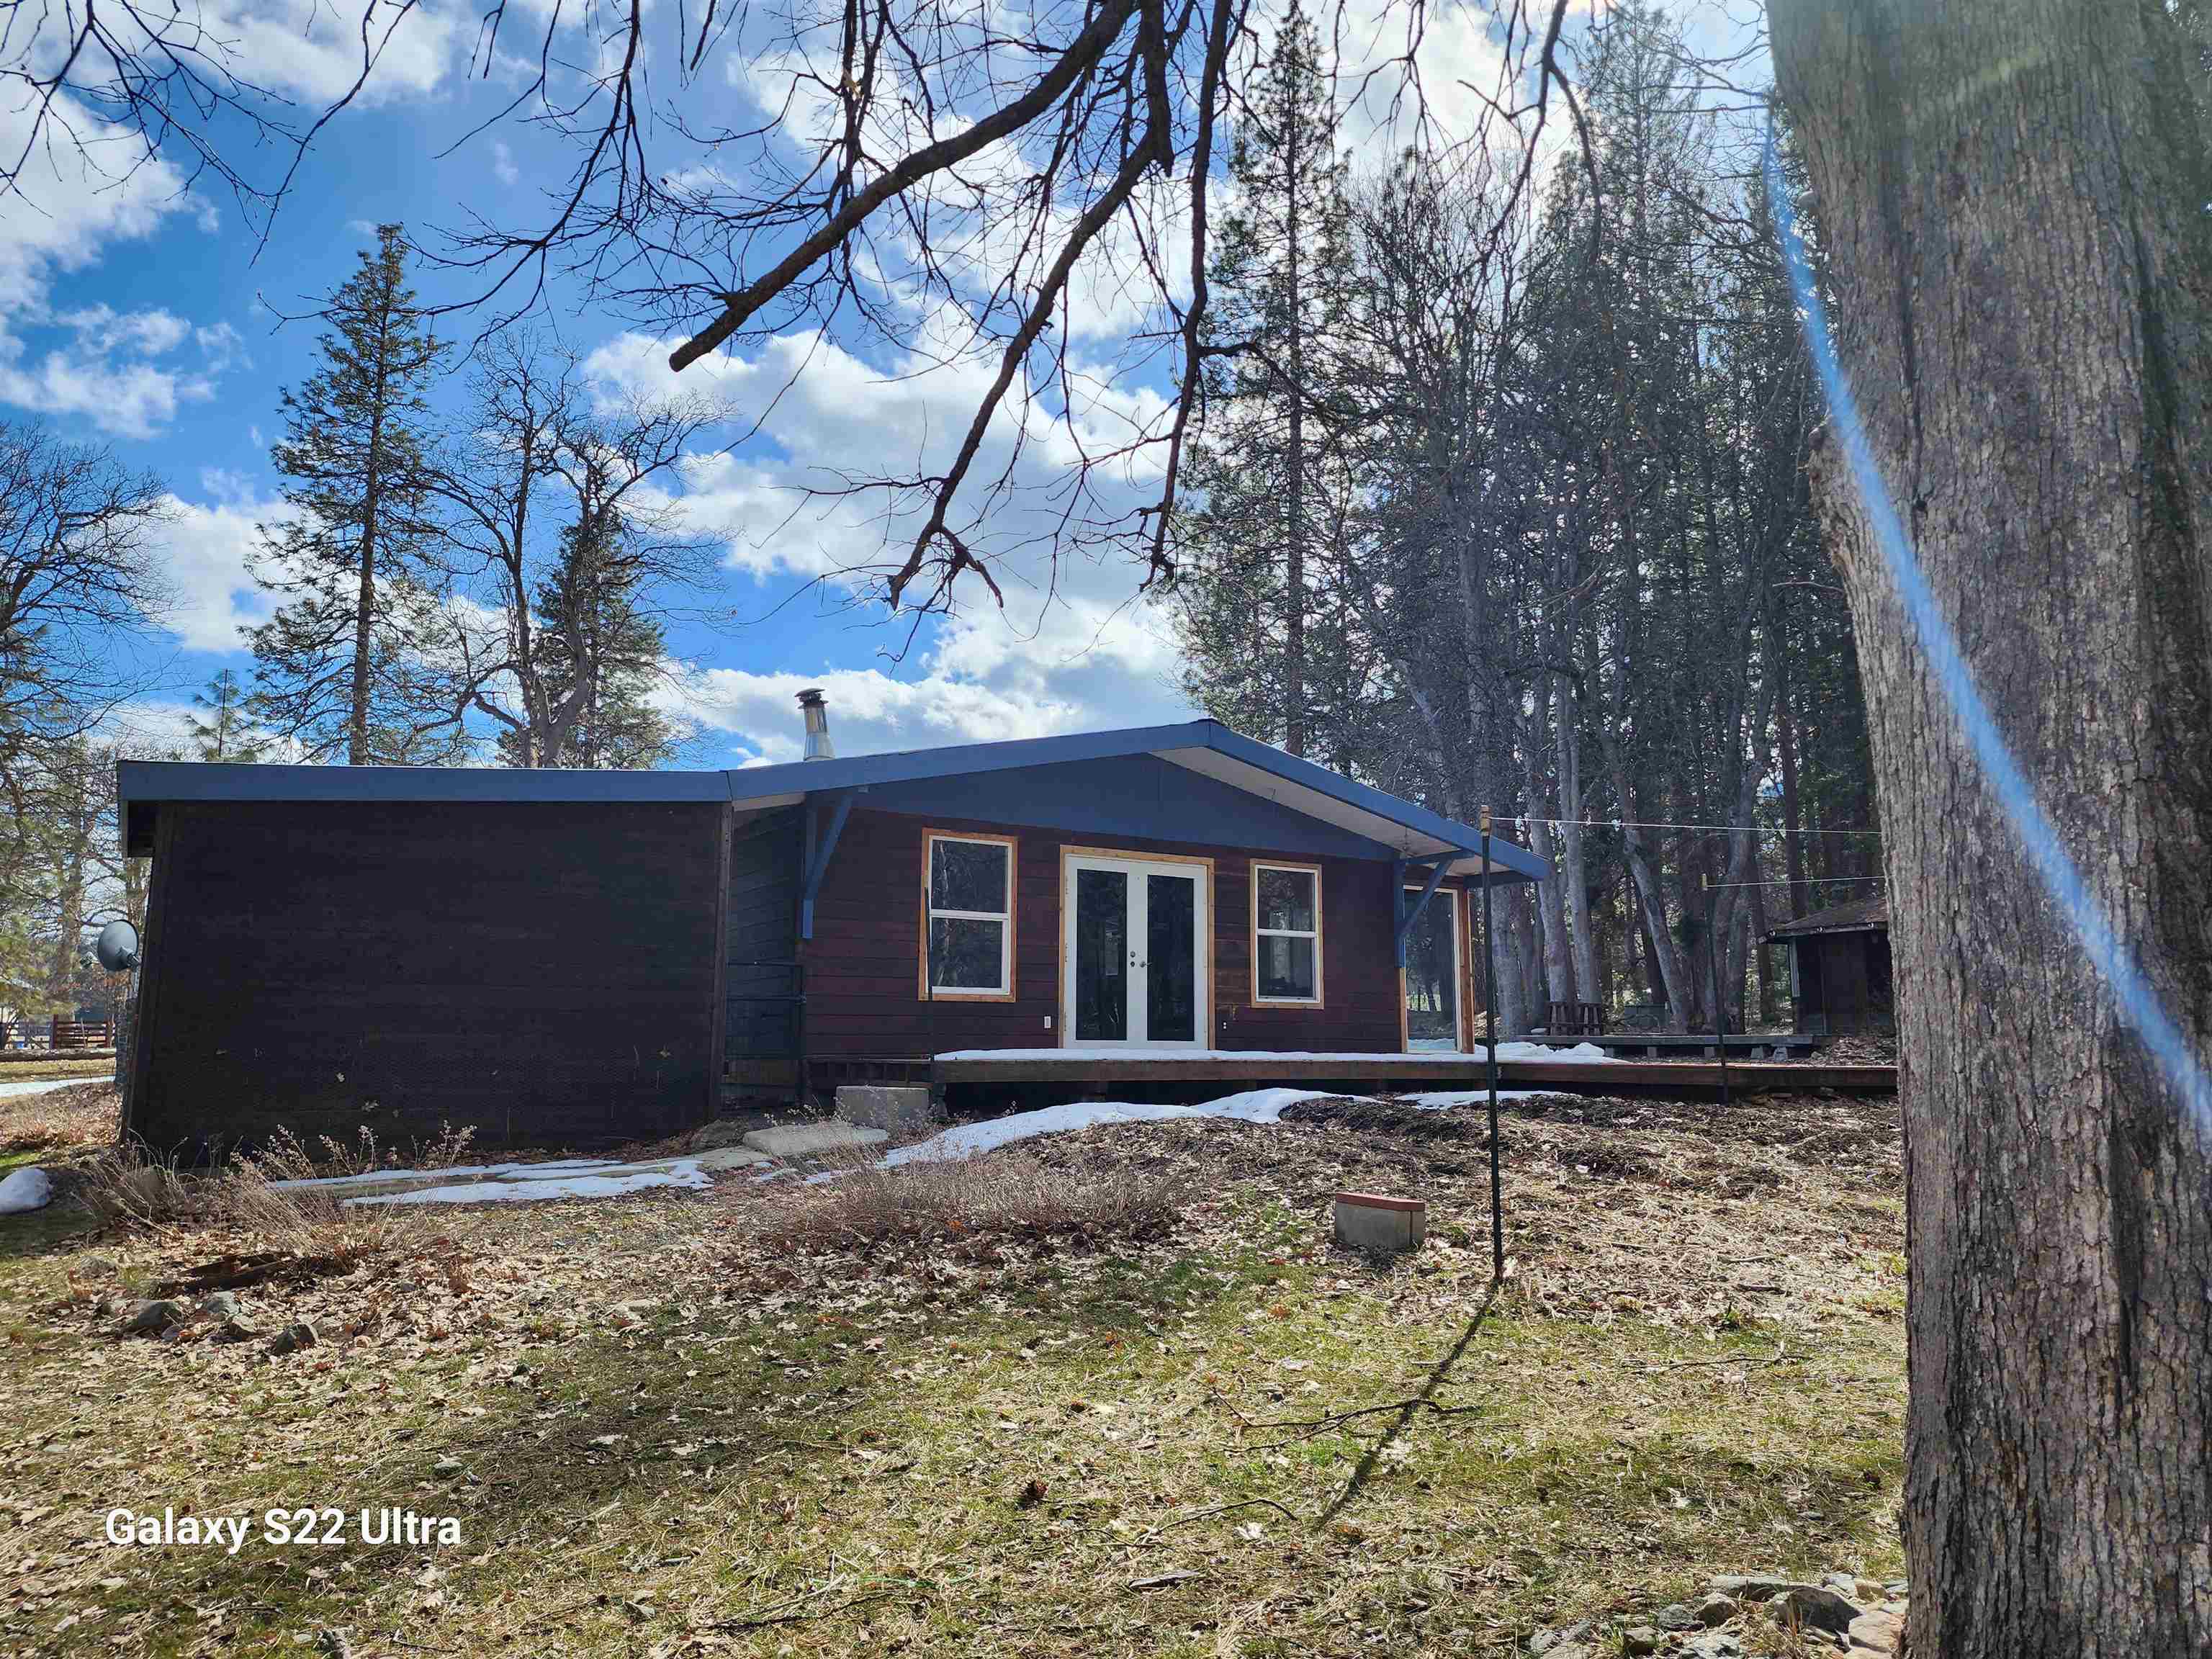 Charming cabin with seasonal  Alder and Sniktaw creeks flowing across property. If that's not enough water there are TWO good sized ponds with a resident duck family. Lots of windows allow natural light in and allows you to enjoy the beautiful creek and nearby mountains. Home is cute with renovated bathroom and an open floor plan and vaulted ceilings that make to space welcoming.. View is stunning of nearby mountain's and ranches. Perfect for a hiking , fishing or hunting retreat . Out buildings include a Octagon  BBQ gazebo with large deck for entertaining,  a good sized workshop , metal carport and a 2 car garage.  Located on a quiet street leading to Forest Service lands and Big Meadow trail head. According to owner hazard insurance is reasonable buyers to verify. Flood Cert is available  Seller is going to fix the wood pecker damage and give a reasonable carpet allowance.  All information is approximate and subject to change buyers to verify all aspects of the property.